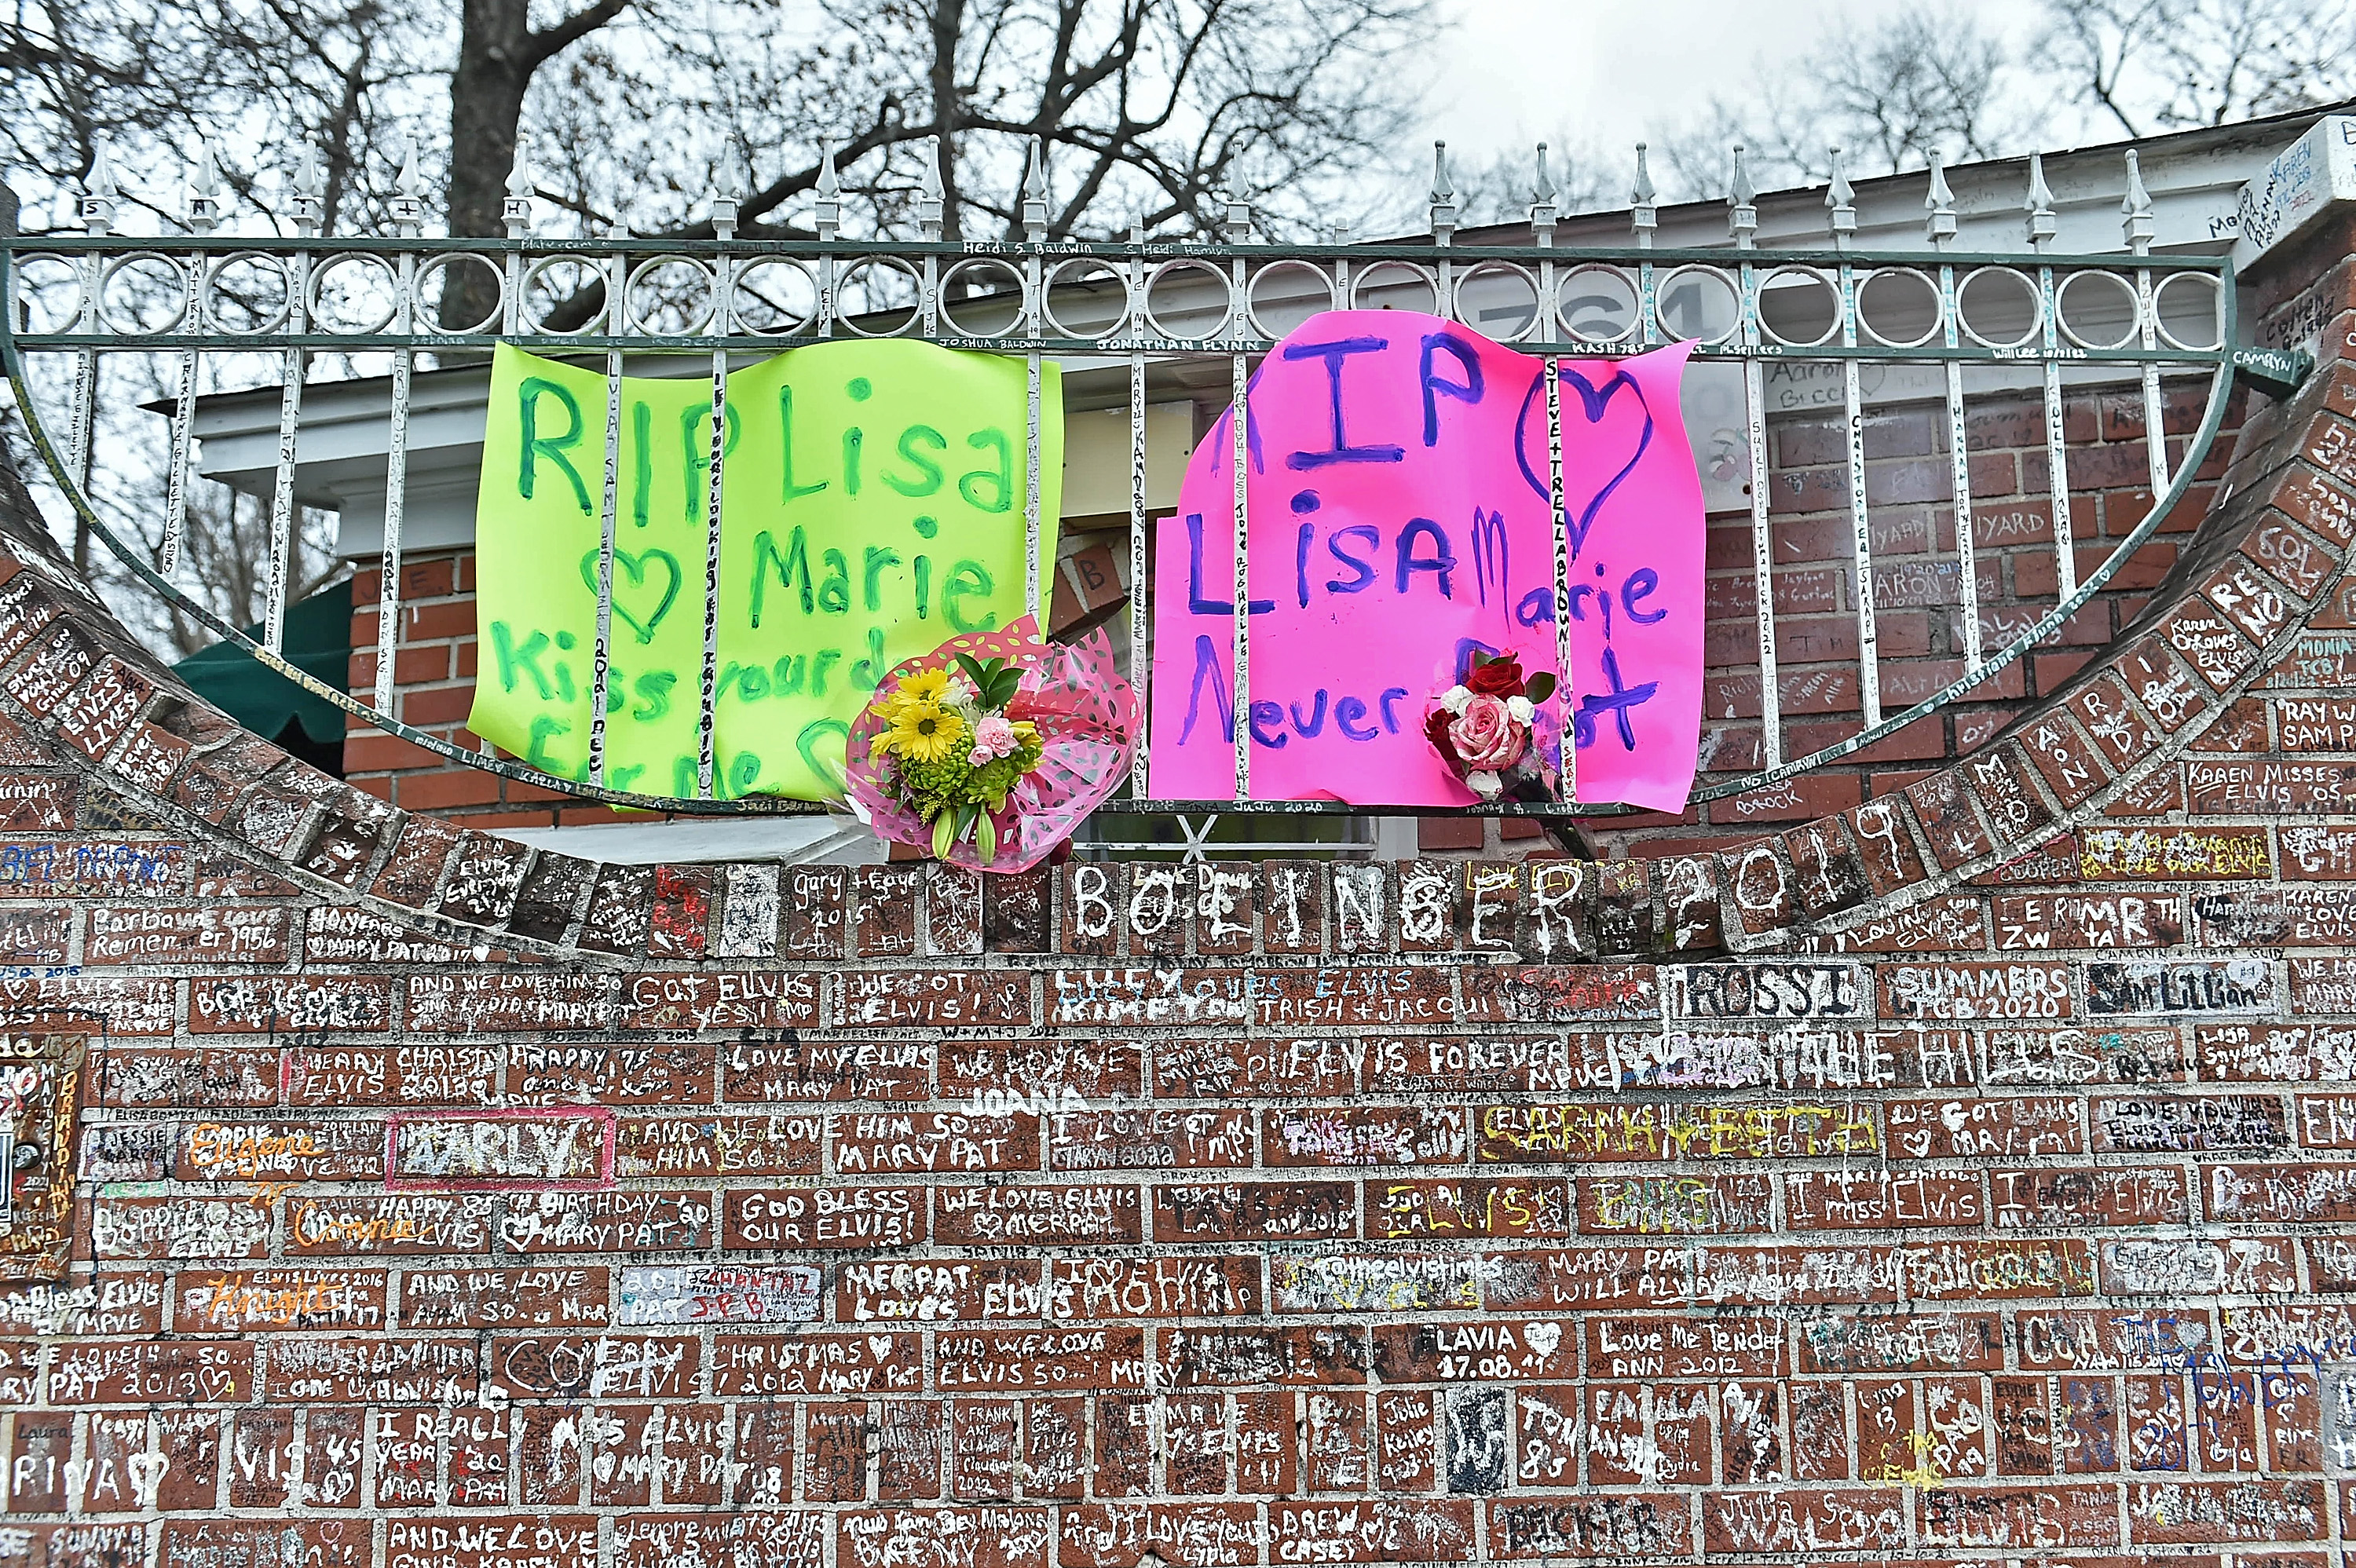 How To Watch Lisa Marie Presley’s Memorial Service At Graceland